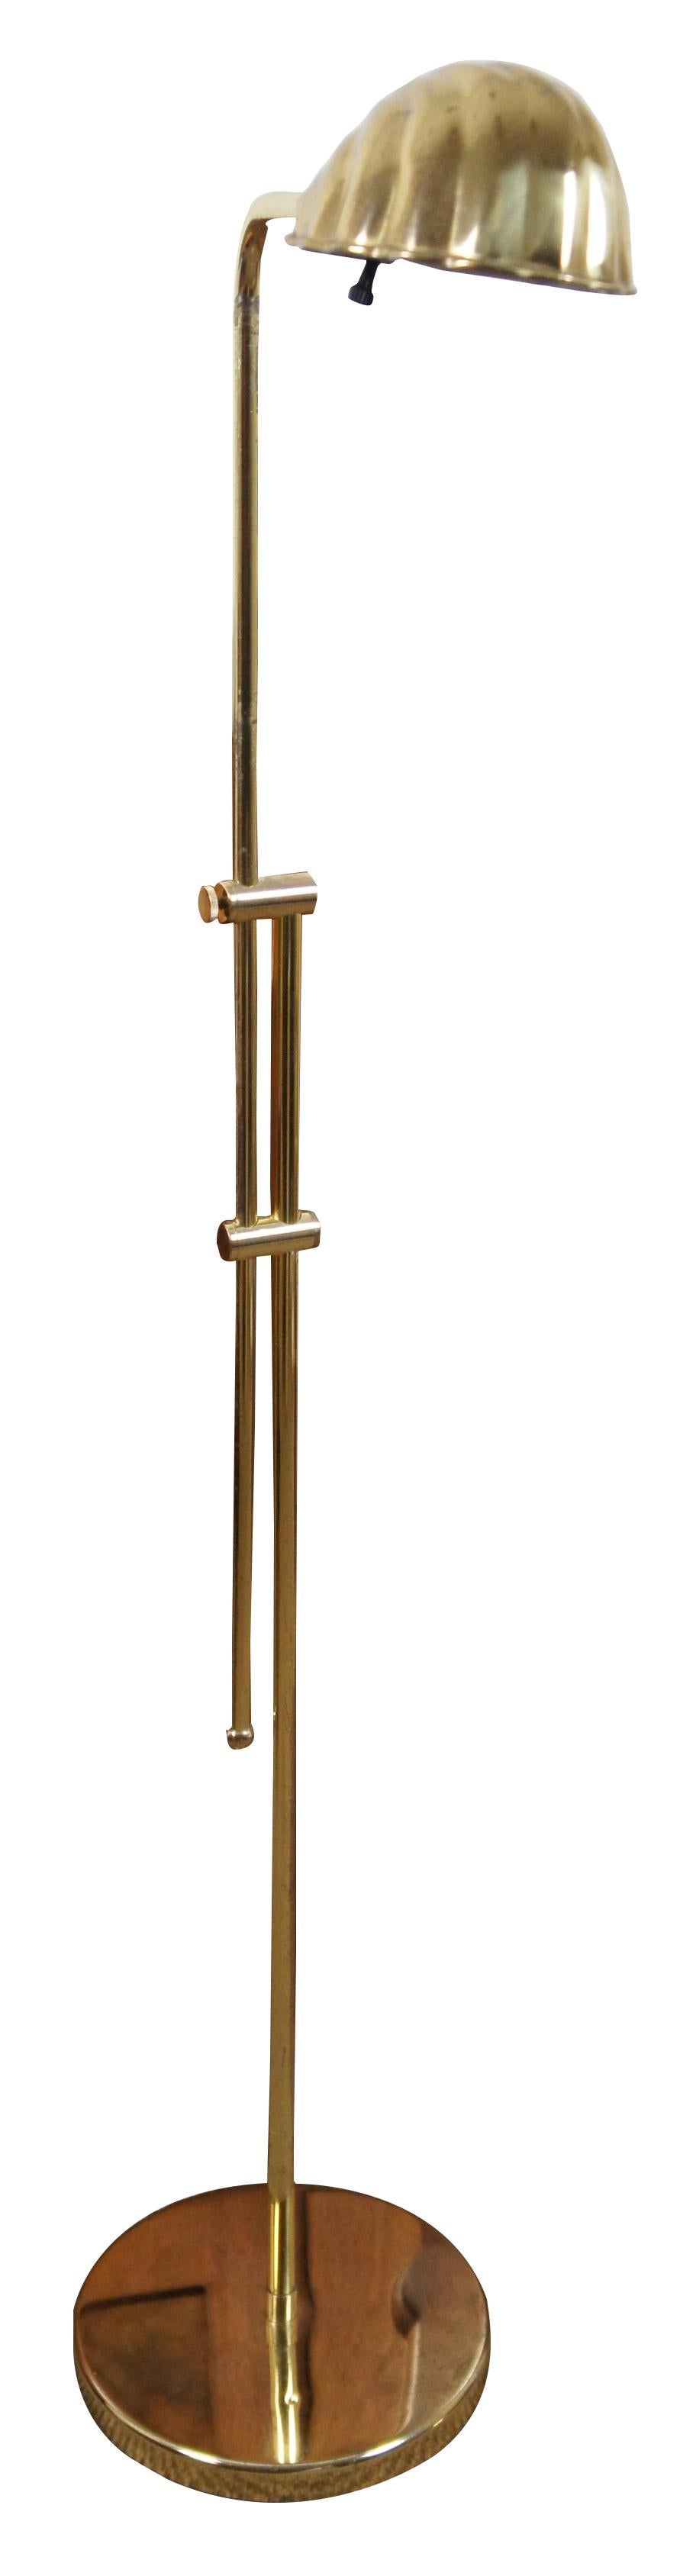 Mid-Century Modern vintage brass floor lamp with adjustable height and clam shell shaped shade.

Measures: 10” x 14” x 61” to 39.5” (width x depth x height).